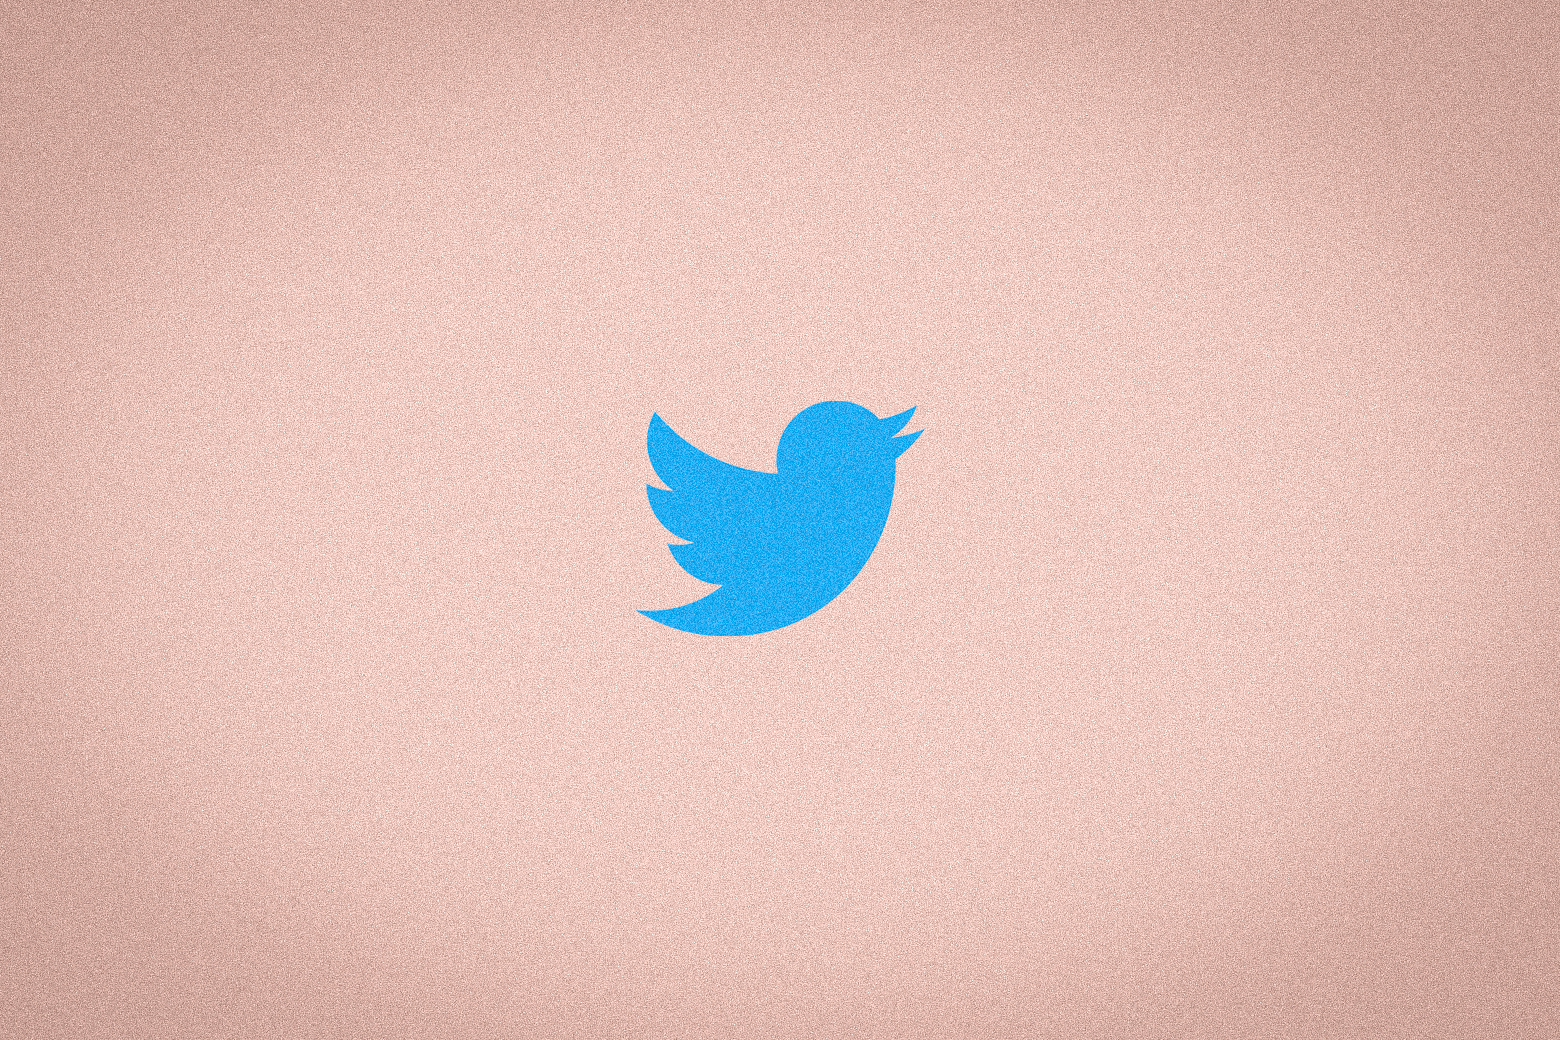 The Twitter logo slowly disappears. 